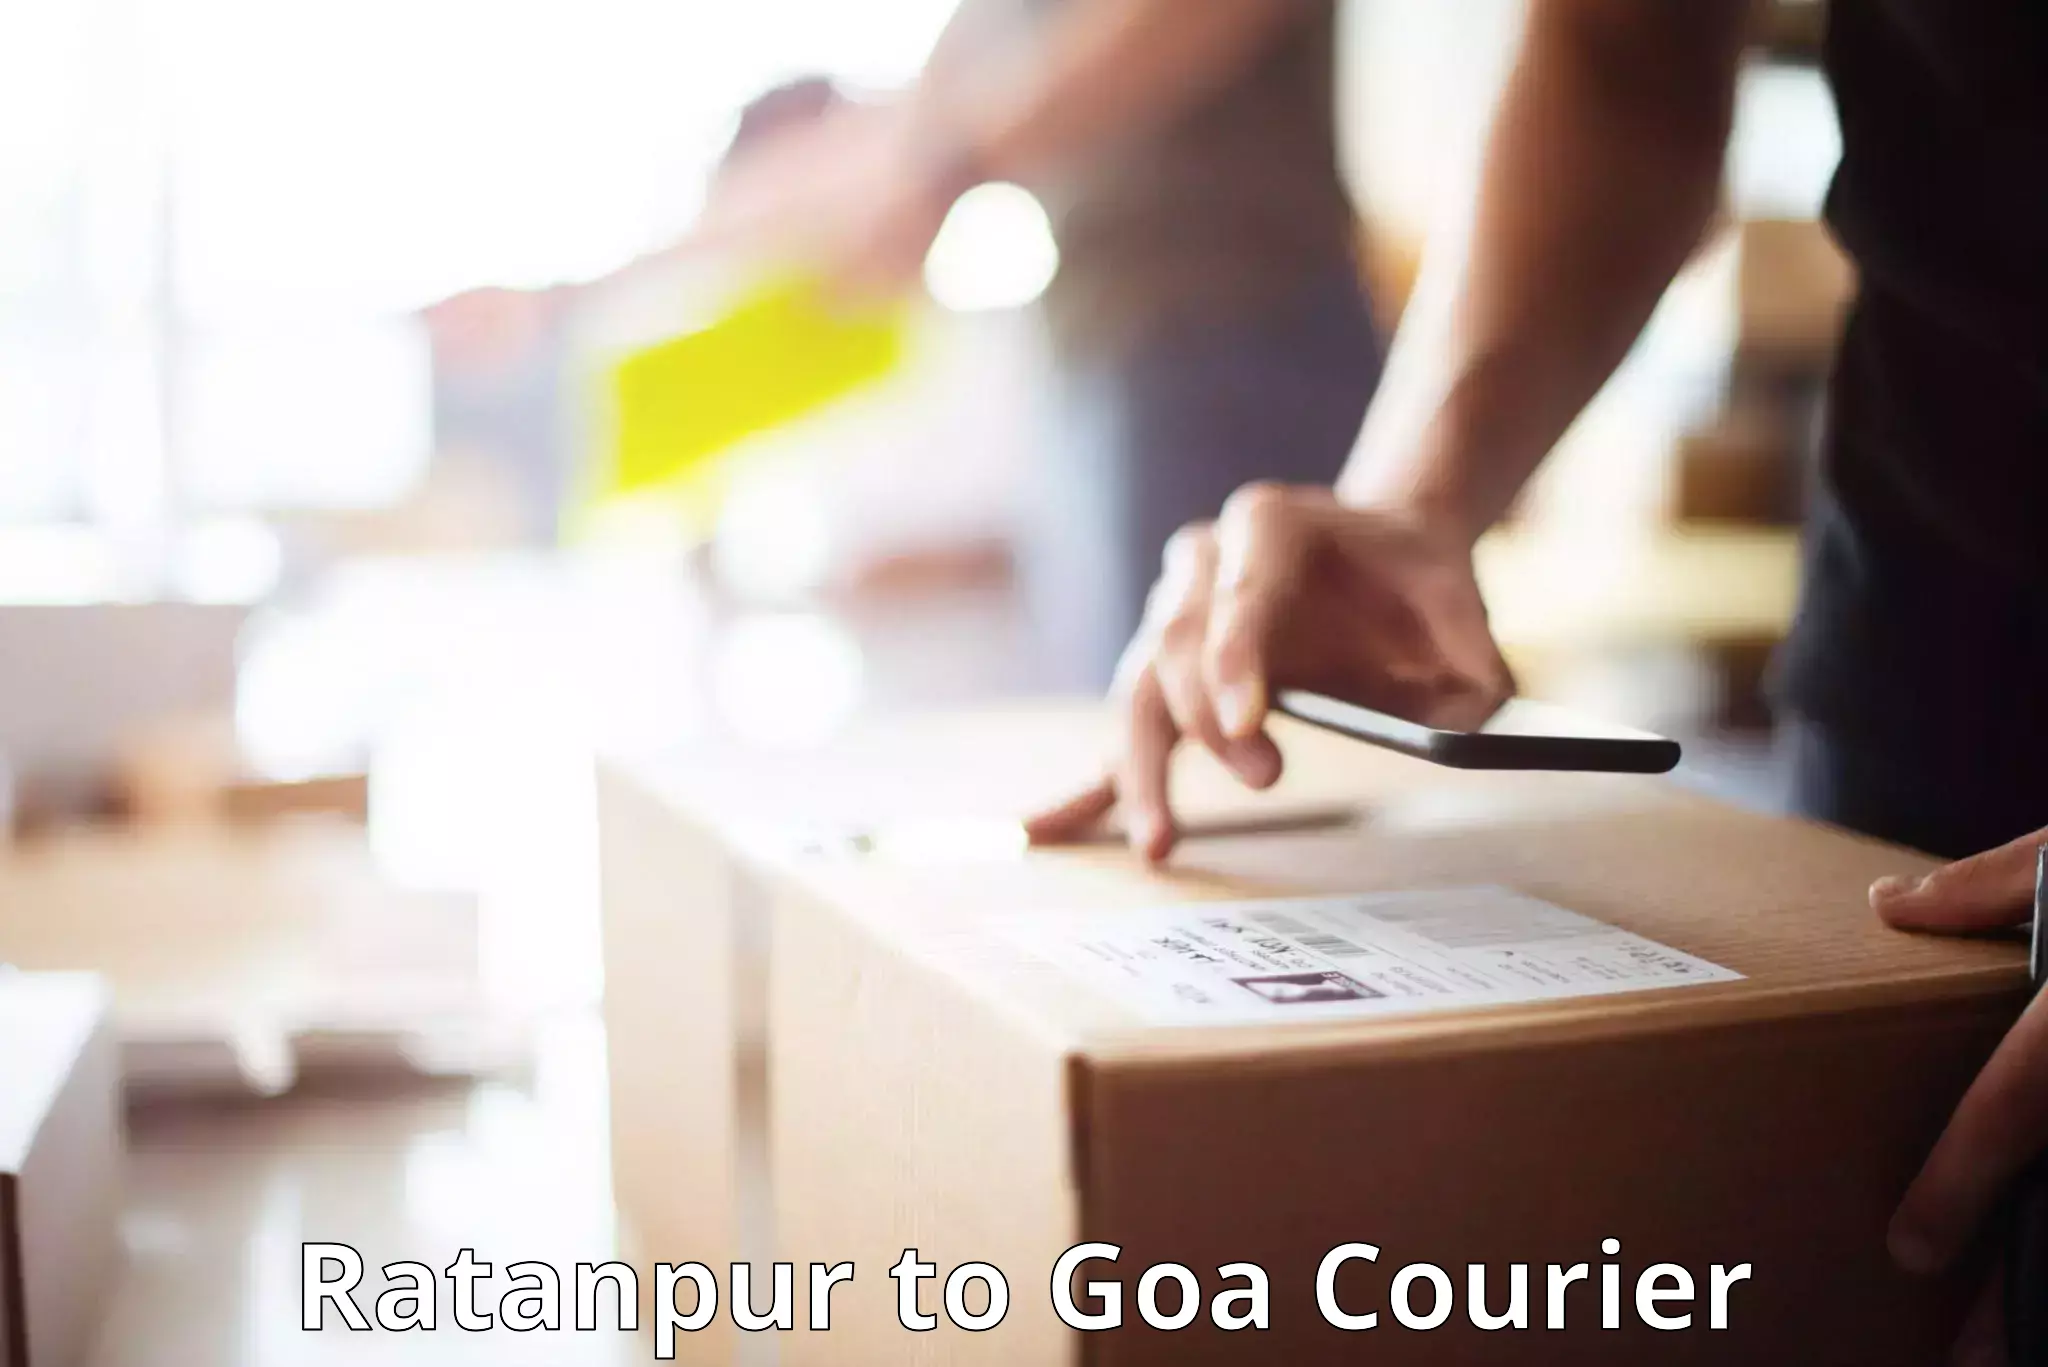 Luggage transport consultancy Ratanpur to Goa